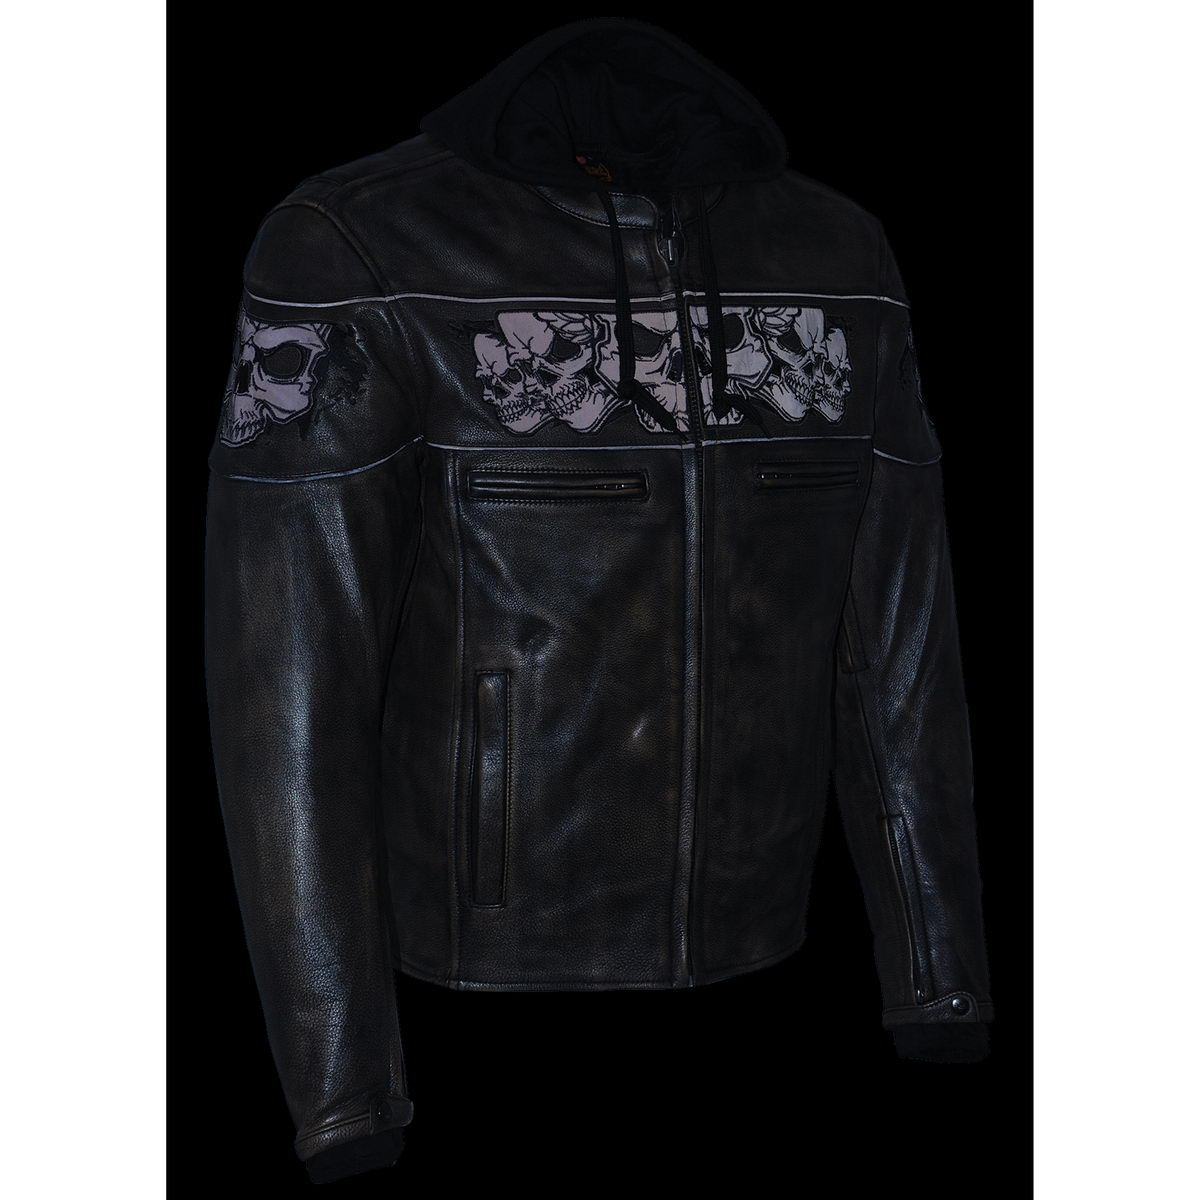 Milwaukee Leather MLM1561 Men's Distress Brown Leather Jacket with Reflective Skulls